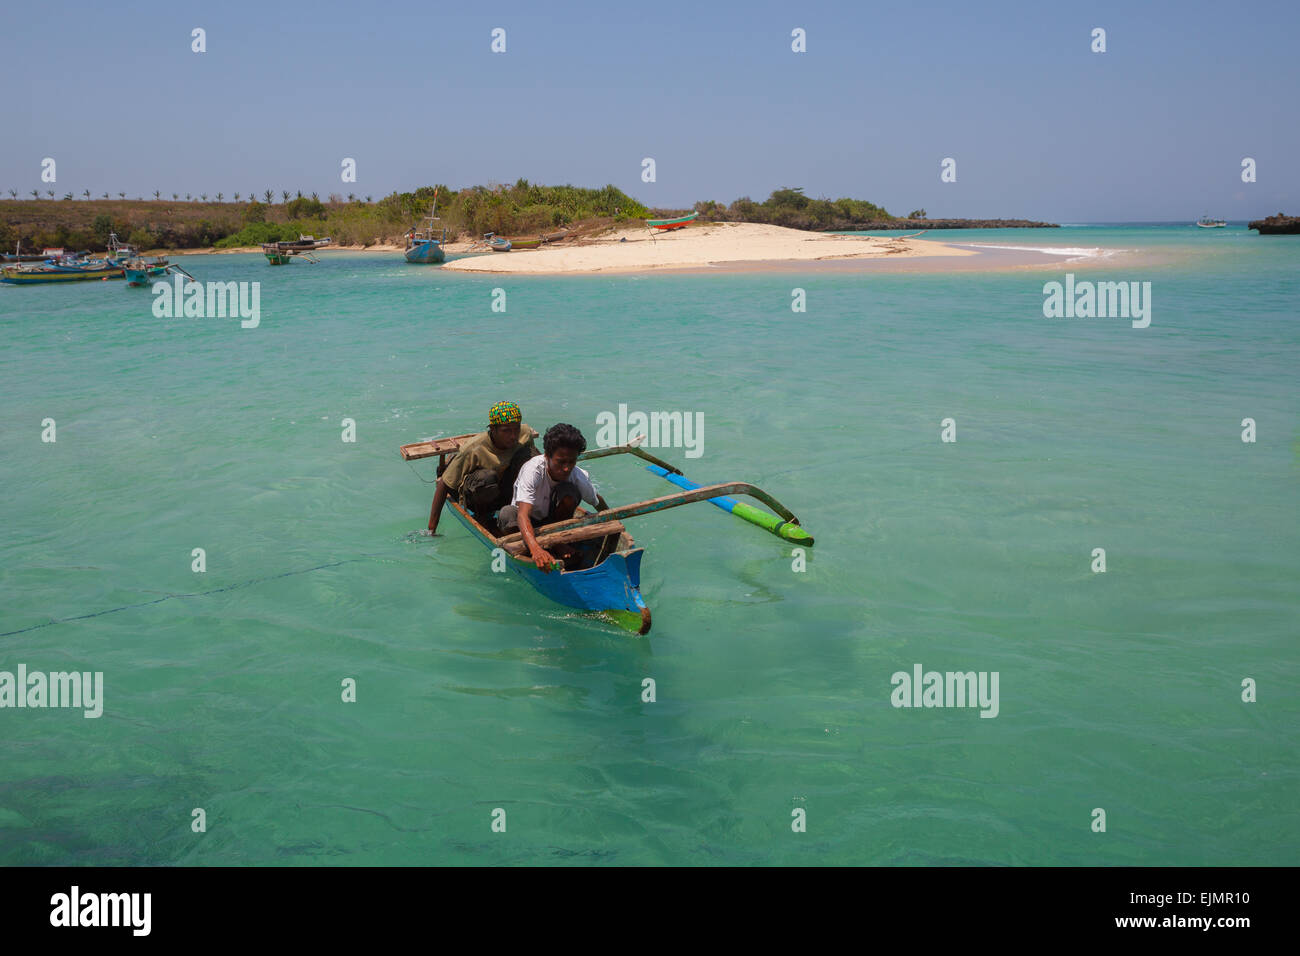 People rowing a small boat by hands on the coastal water of Pero, a fishing village in Kodi, Southwest Sumba, East Nusa Tenggara, Indonesia. Stock Photo